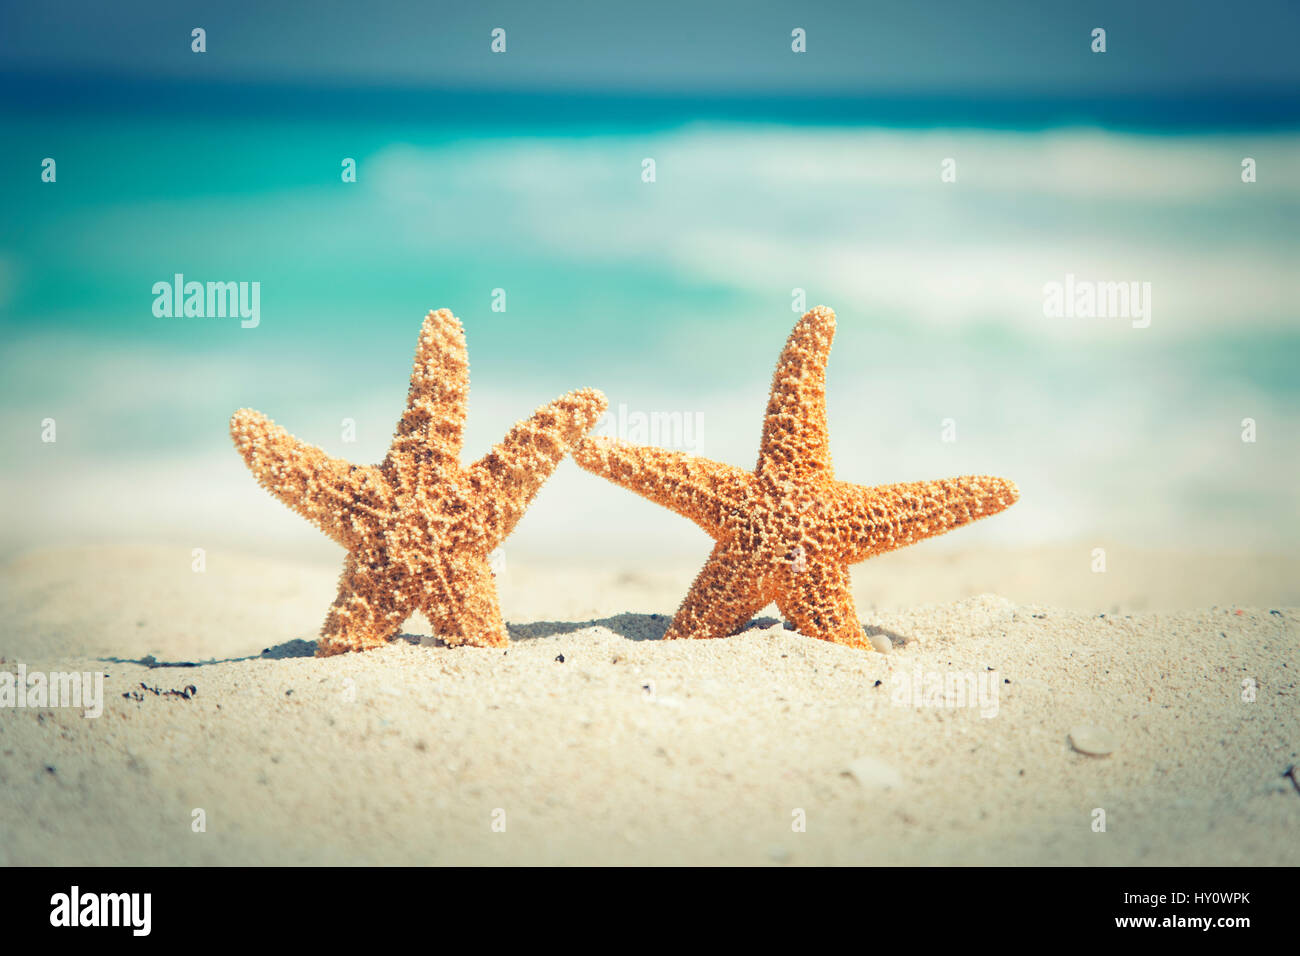 Two cross-processed starfish on the beach with ocean waves in background Stock Photo